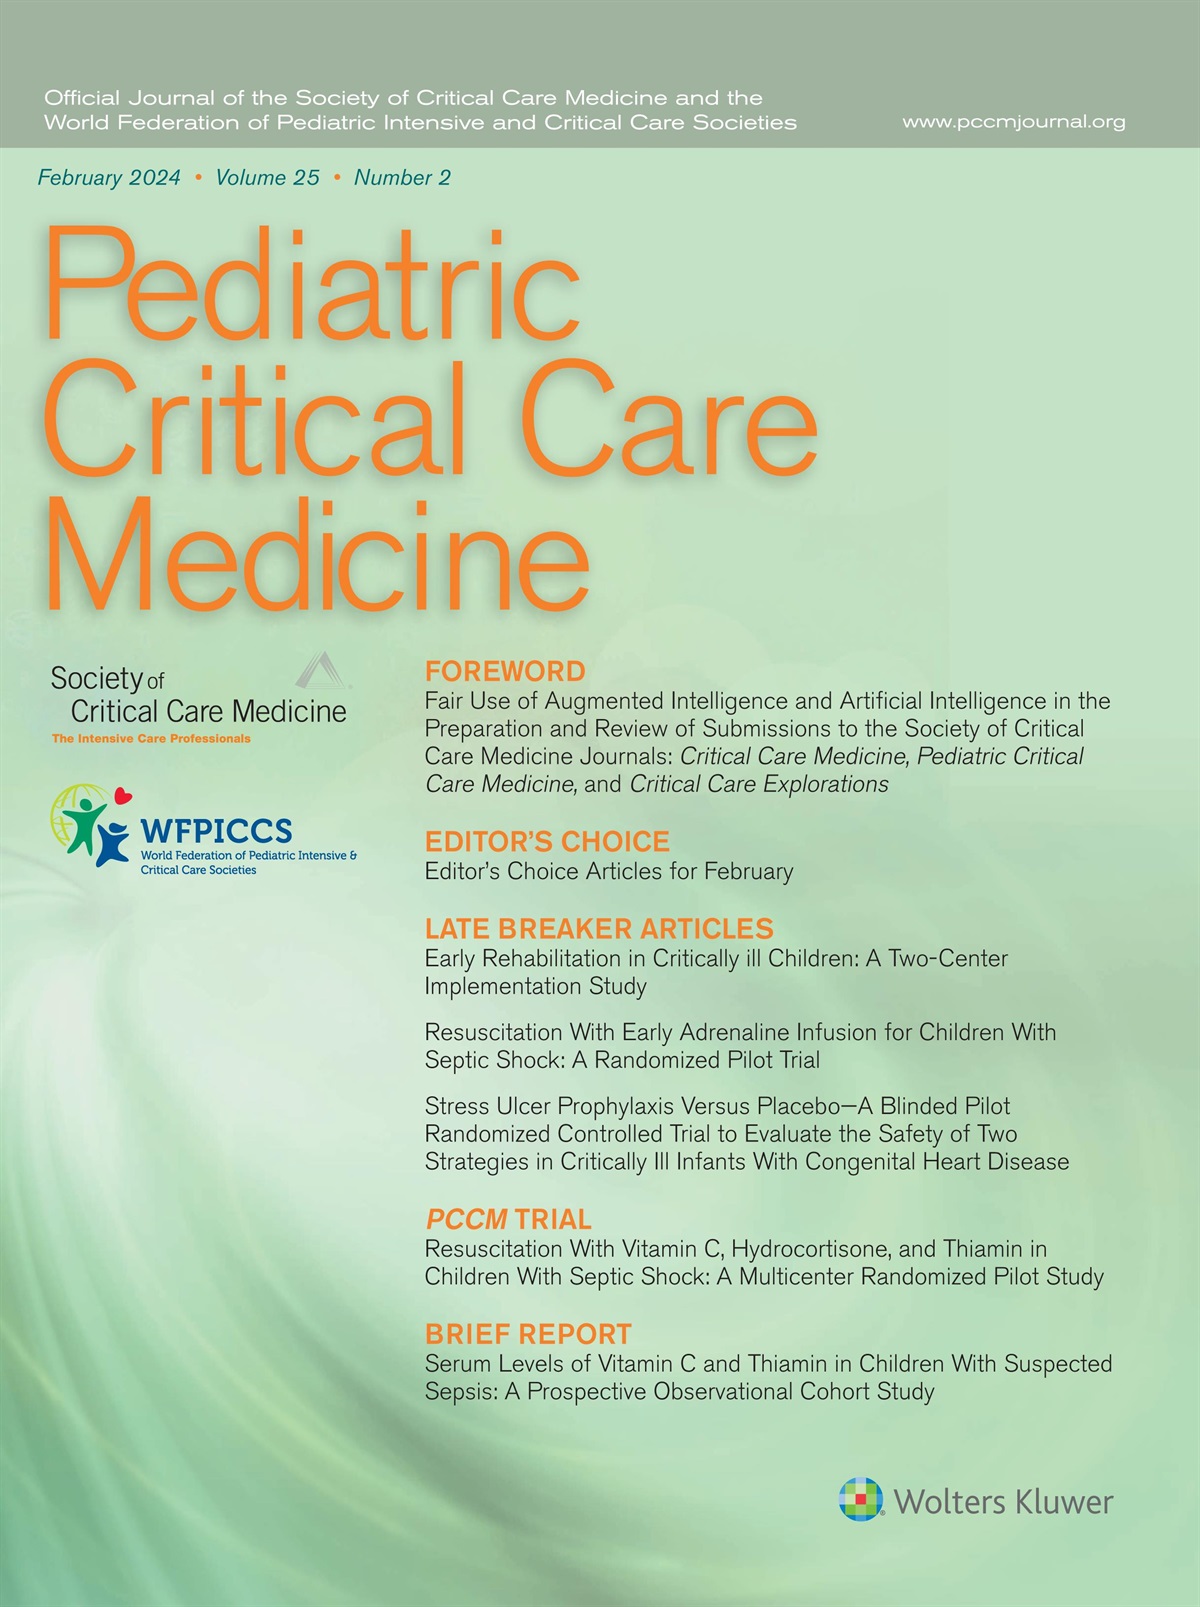 Moving Away From Randomized Controlled Trials to Hybrid Implementation Studies for Complex Interventions in the PICU*